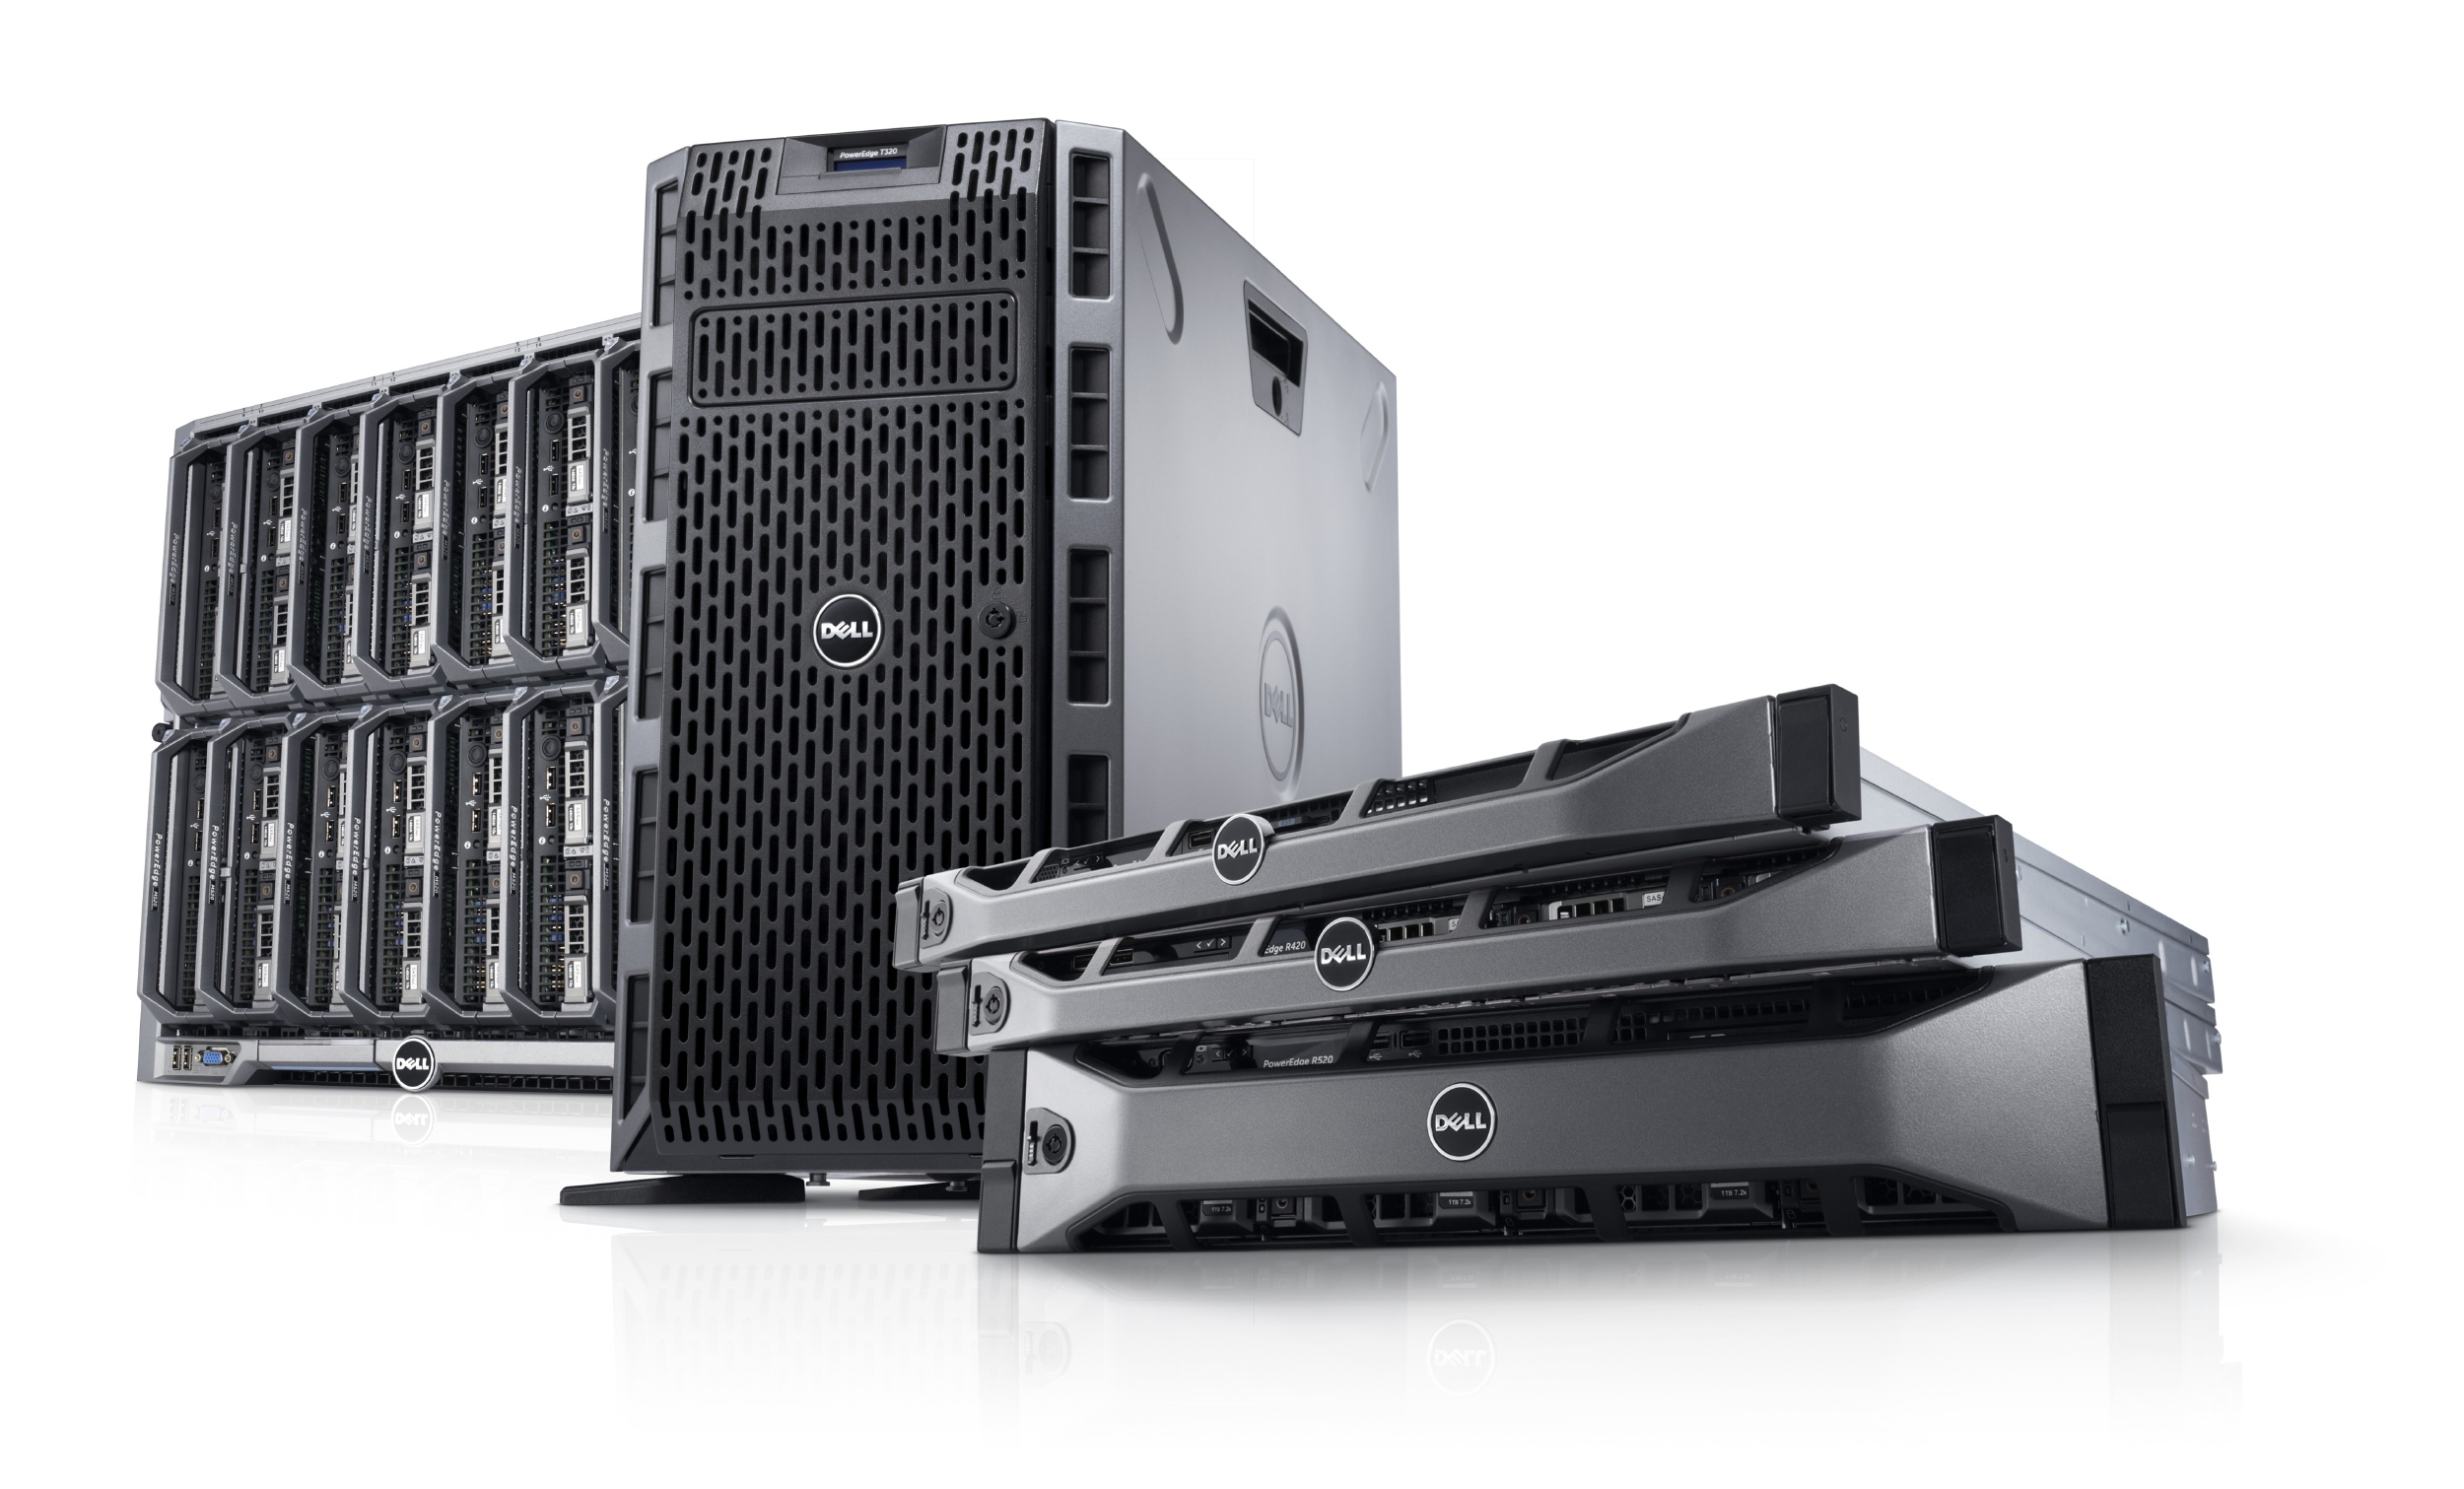 Dell PowerEdge 12G family image, featuring PowerEdge M520 blade servers in a PowerEdge M1000e modular blade enclosure, a PowerEdge T320 tower server, and PowerEdge R320, R420, and R520 rack servers.